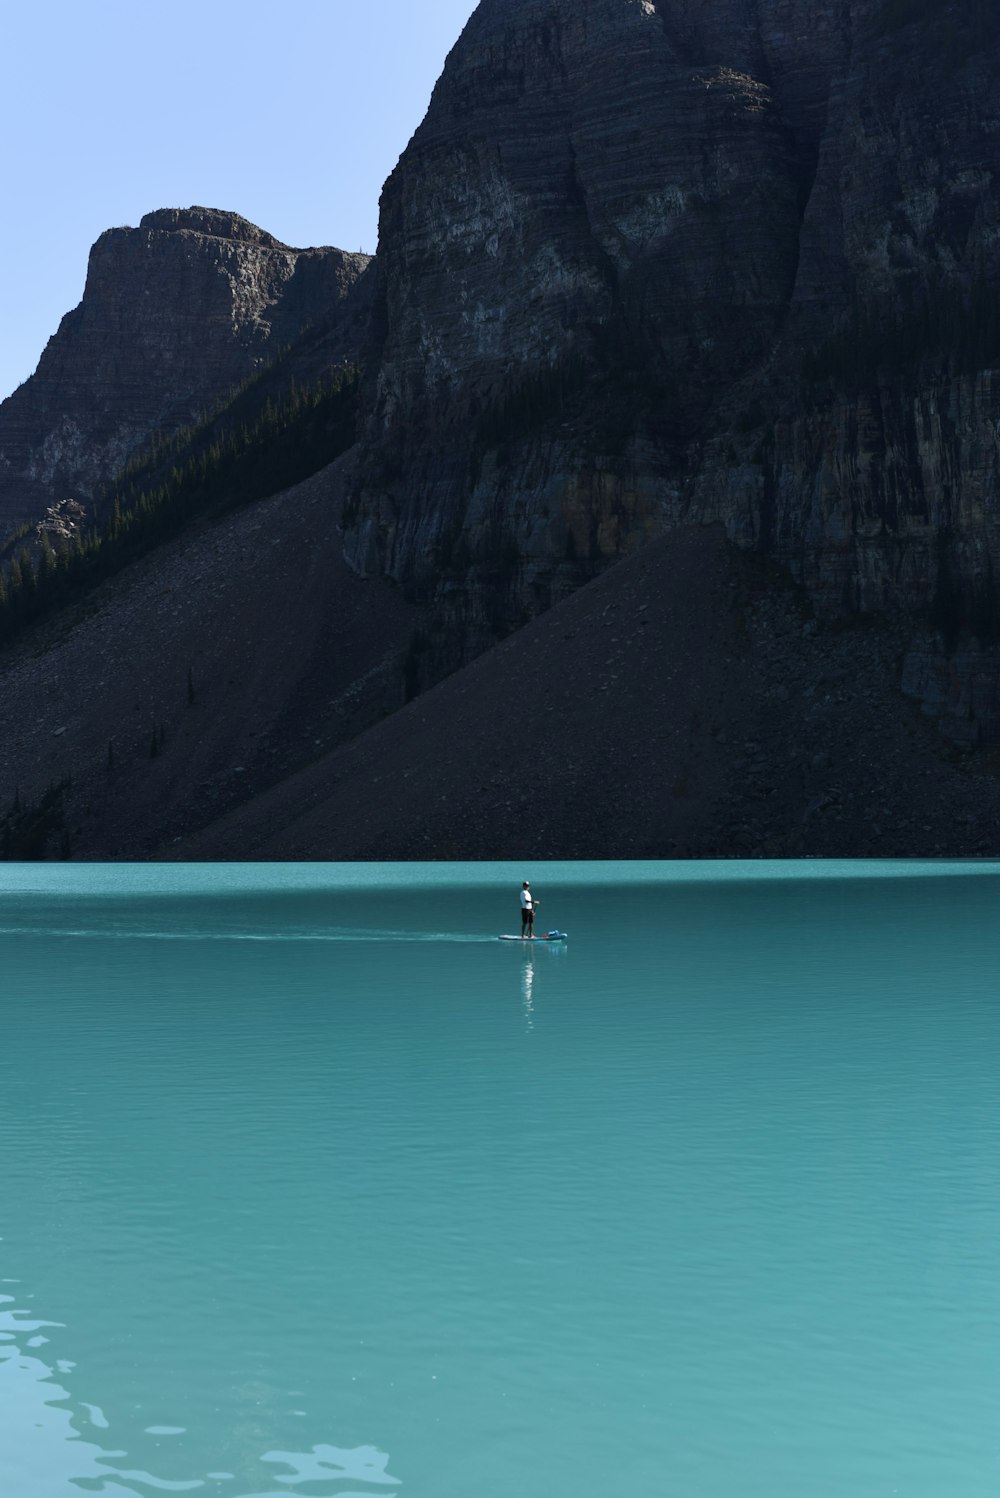 a lone person in the middle of a large body of water